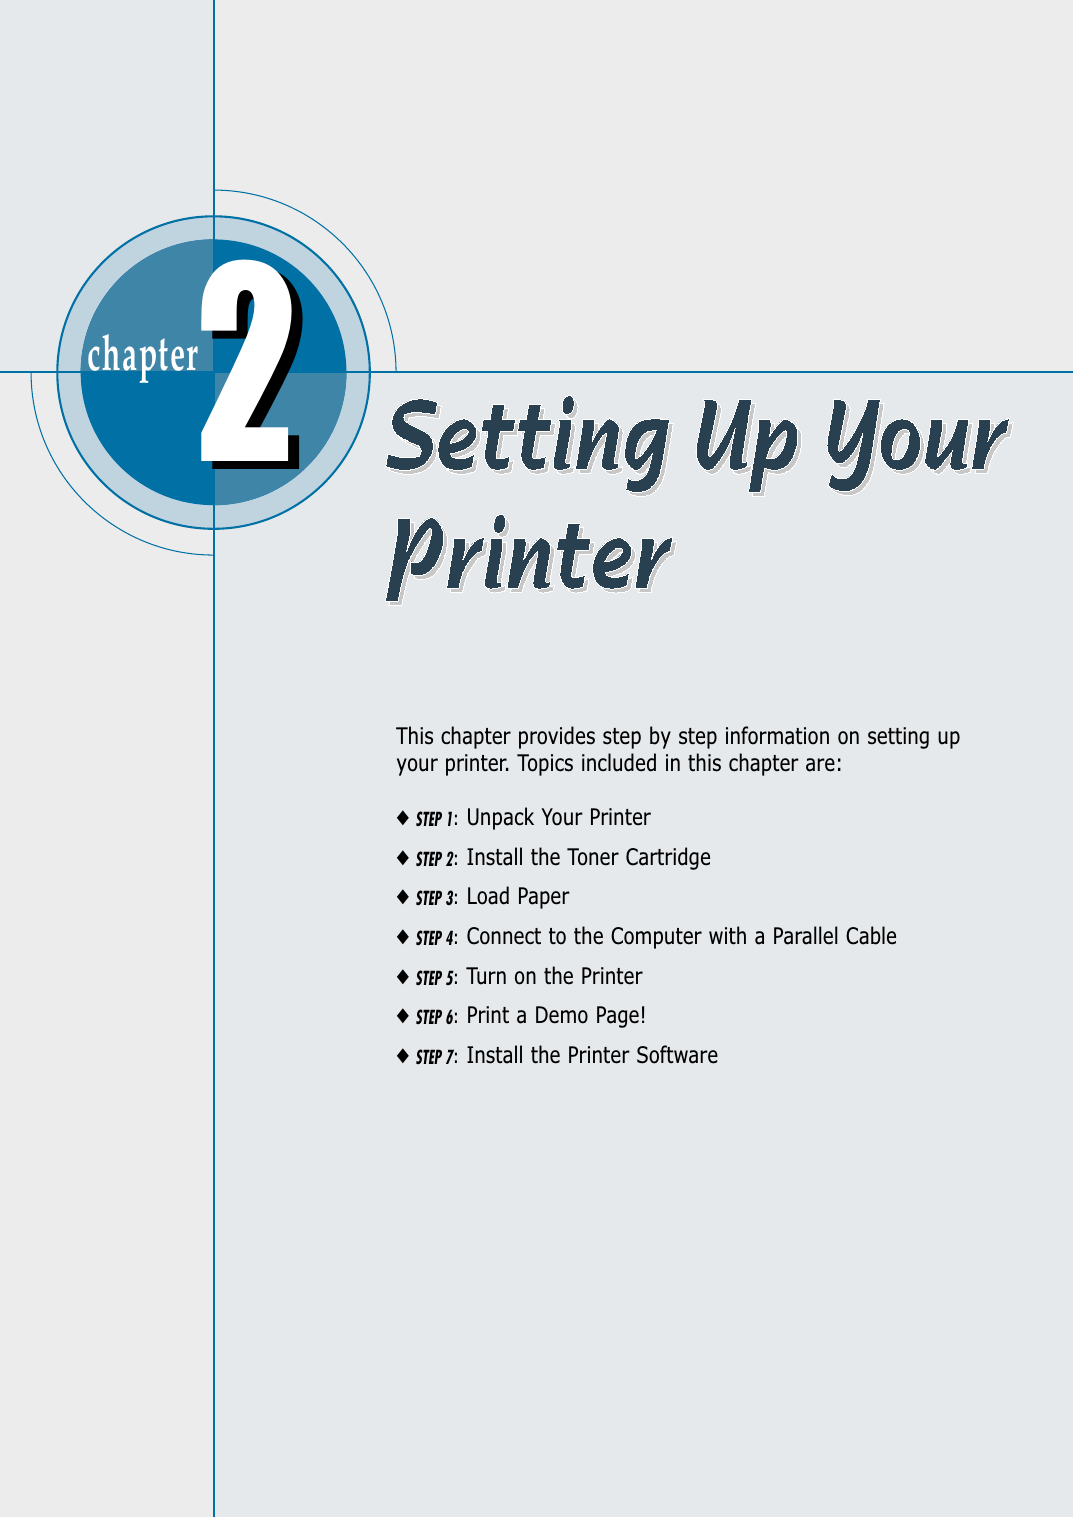 chapter  This chapter provides step by step information on setting upyour printer. Topics included in this chapter are:◆STEP 1:Unpack Your Printer◆STEP 2:Install the Toner Cartridge◆STEP 3:Load Paper◆STEP 4:Connect to the Computer with a Parallel Cable◆STEP 5:Turn on the Printer◆STEP 6:Print a Demo Page!◆STEP 7:Install the Printer Software22